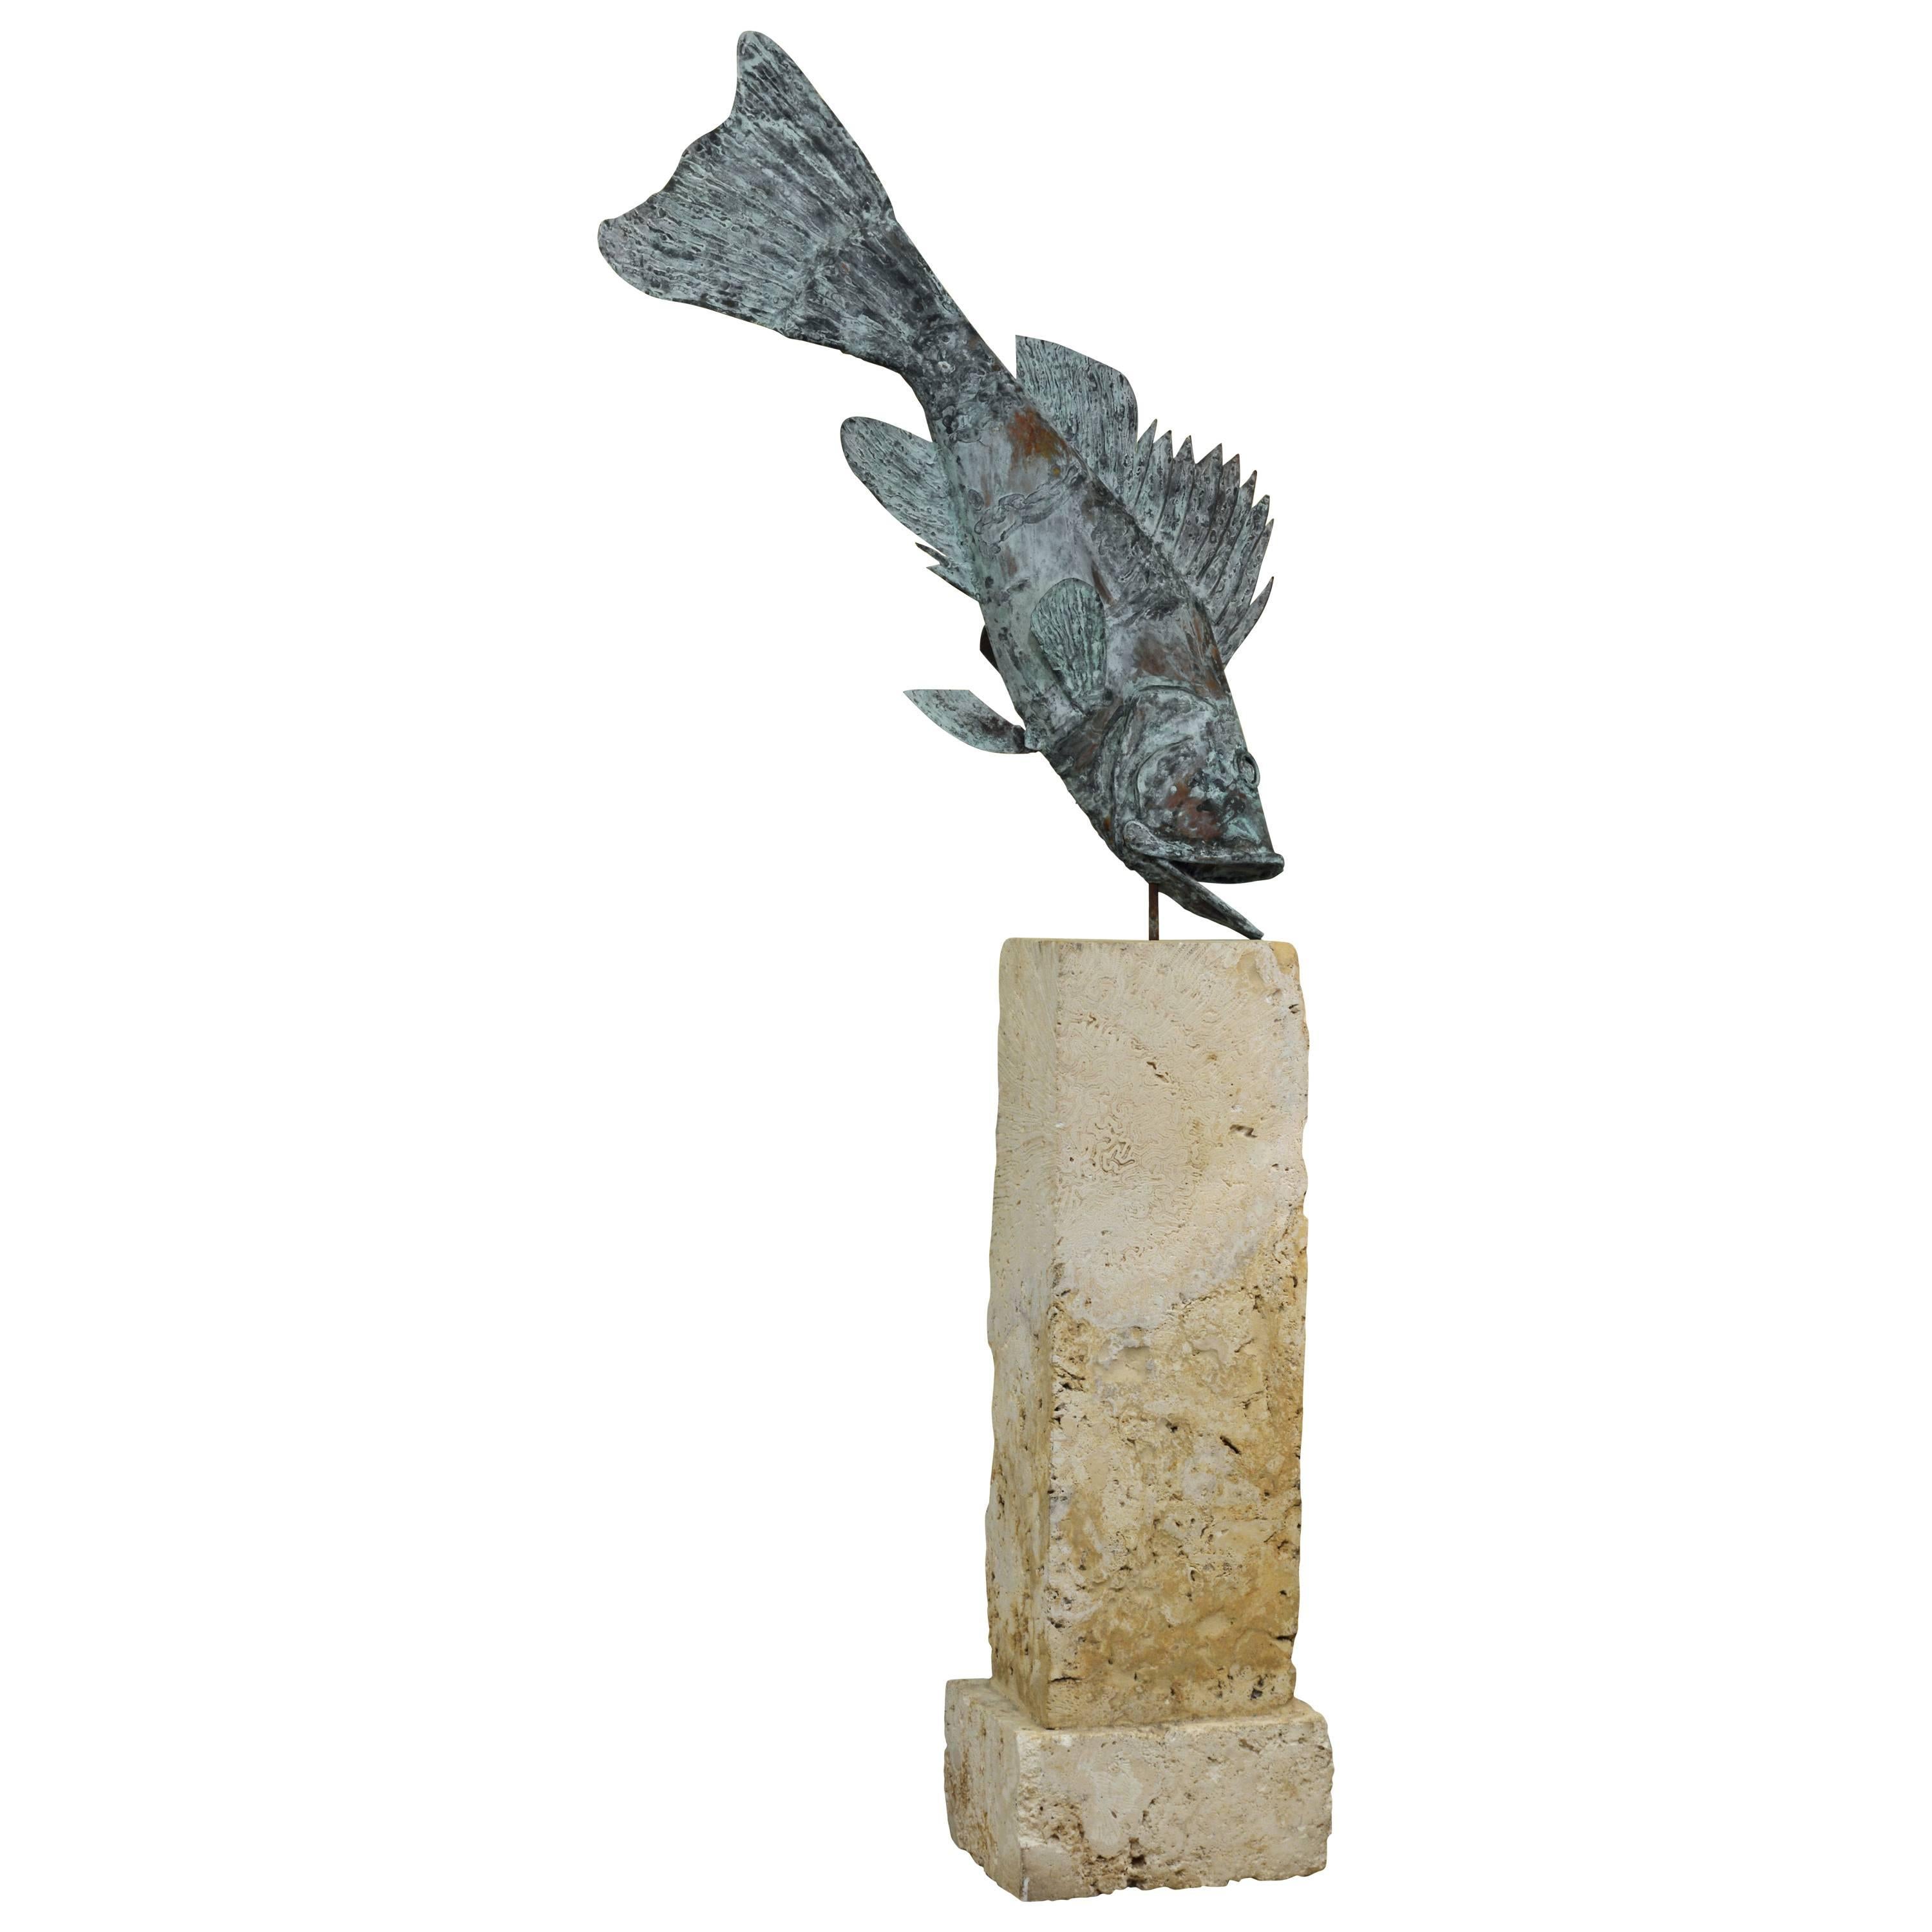 Large Verdigris Copper Sculpture of a Fish Mounted on a Real Coral Rock Pedestal